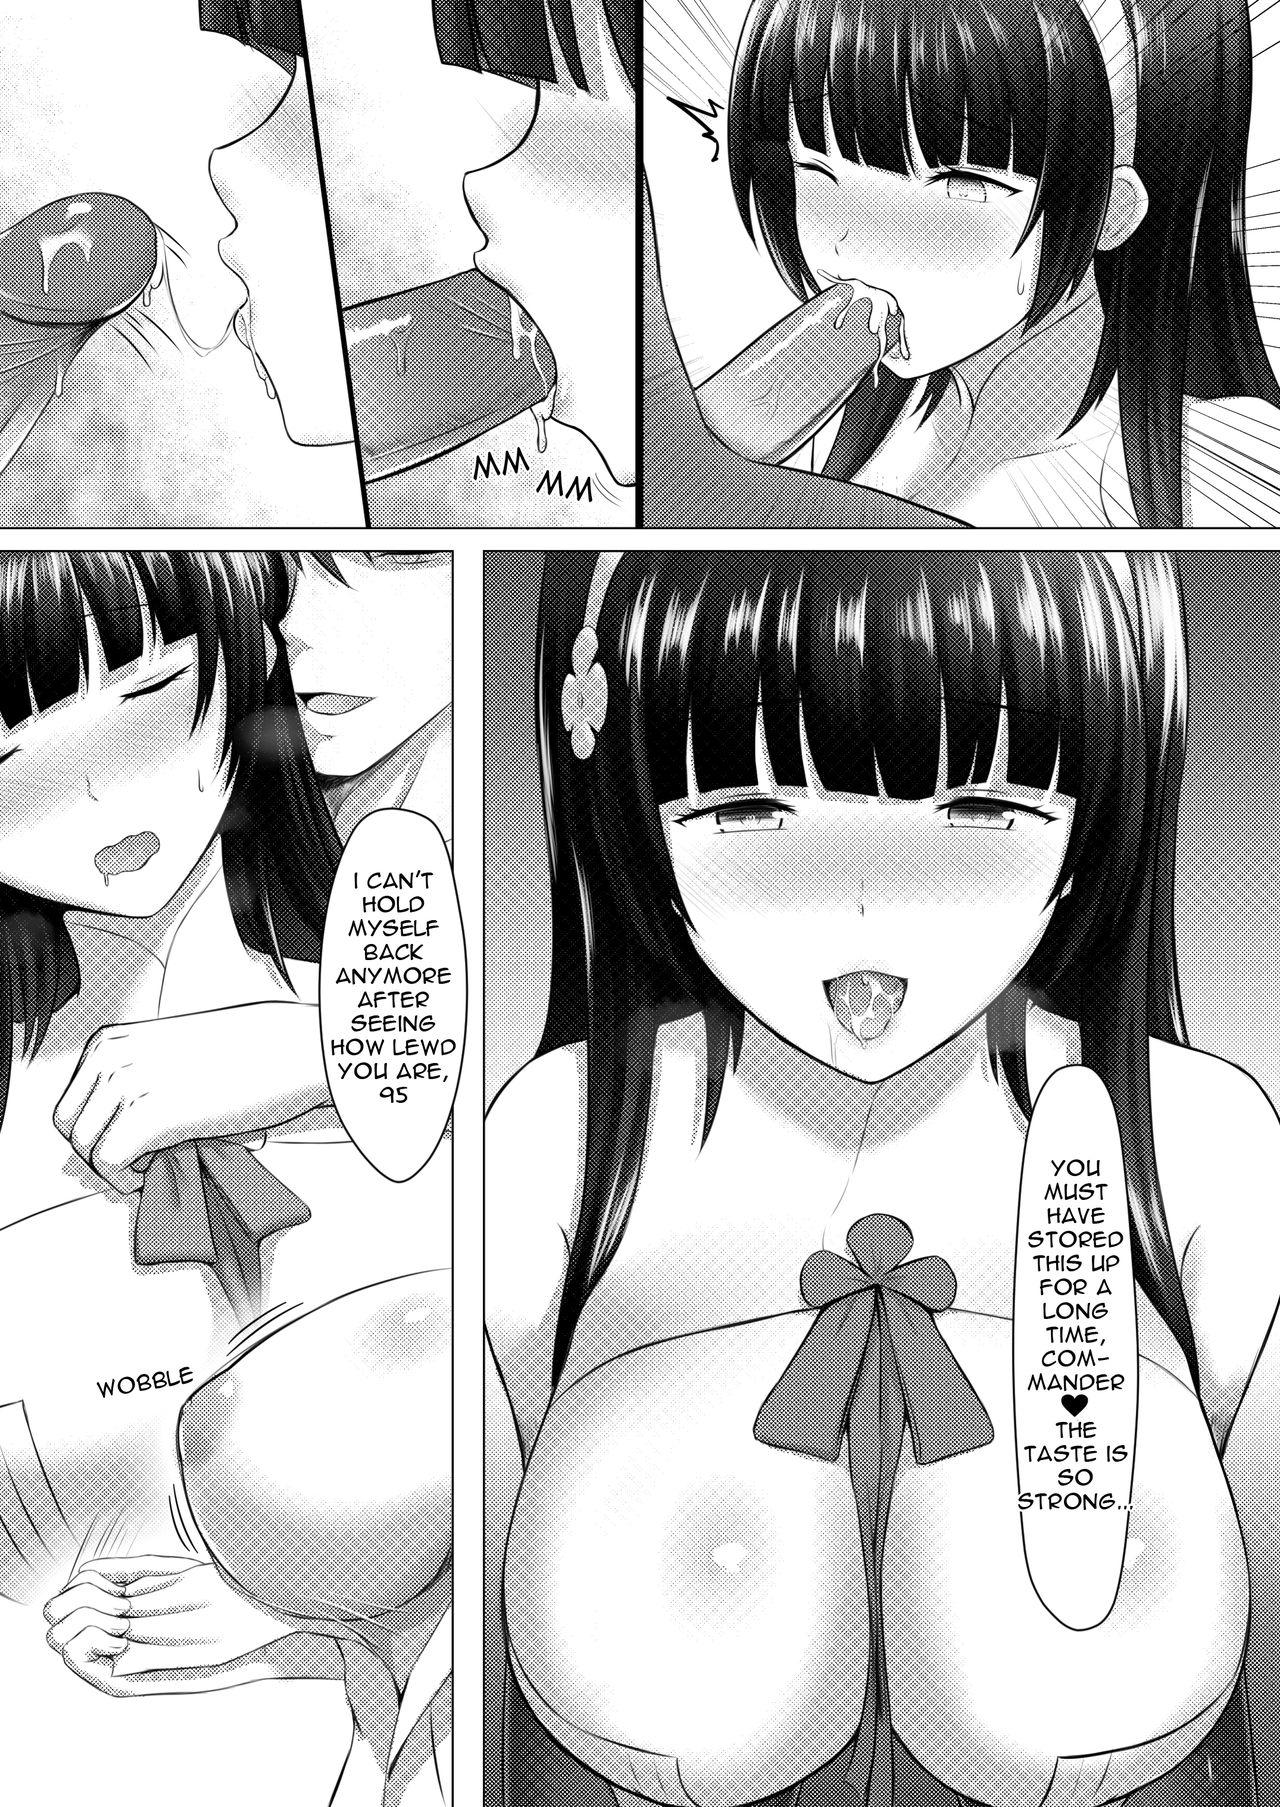 Peeing A Lovely Flower's Gift - Girls frontline Facial Cumshot - Page 10